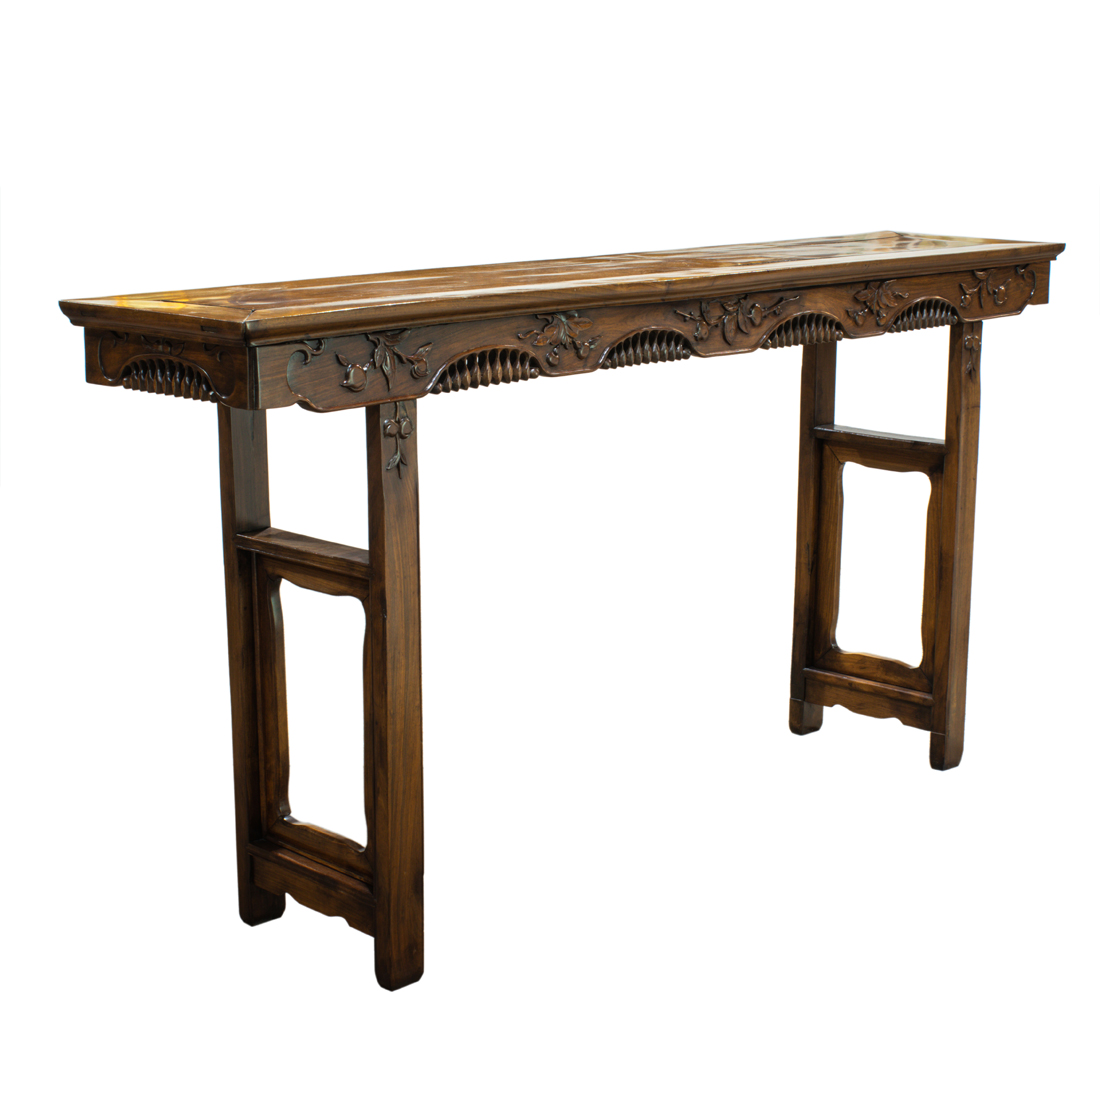 CHINESE HARDWOOD SIDE TABLE Chinese